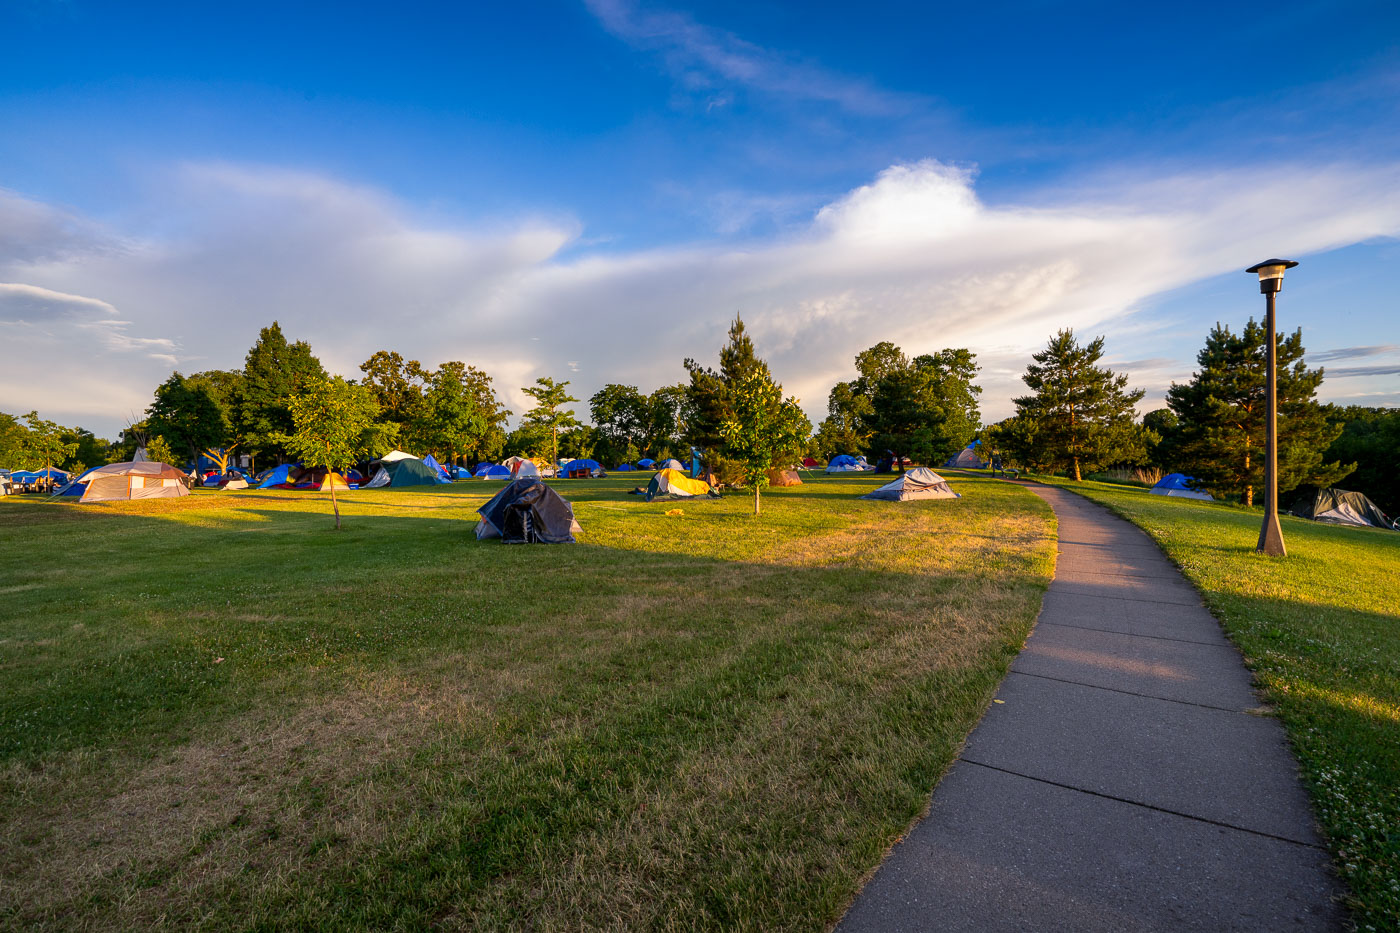 Tents at Powderhorn Park on the green grass